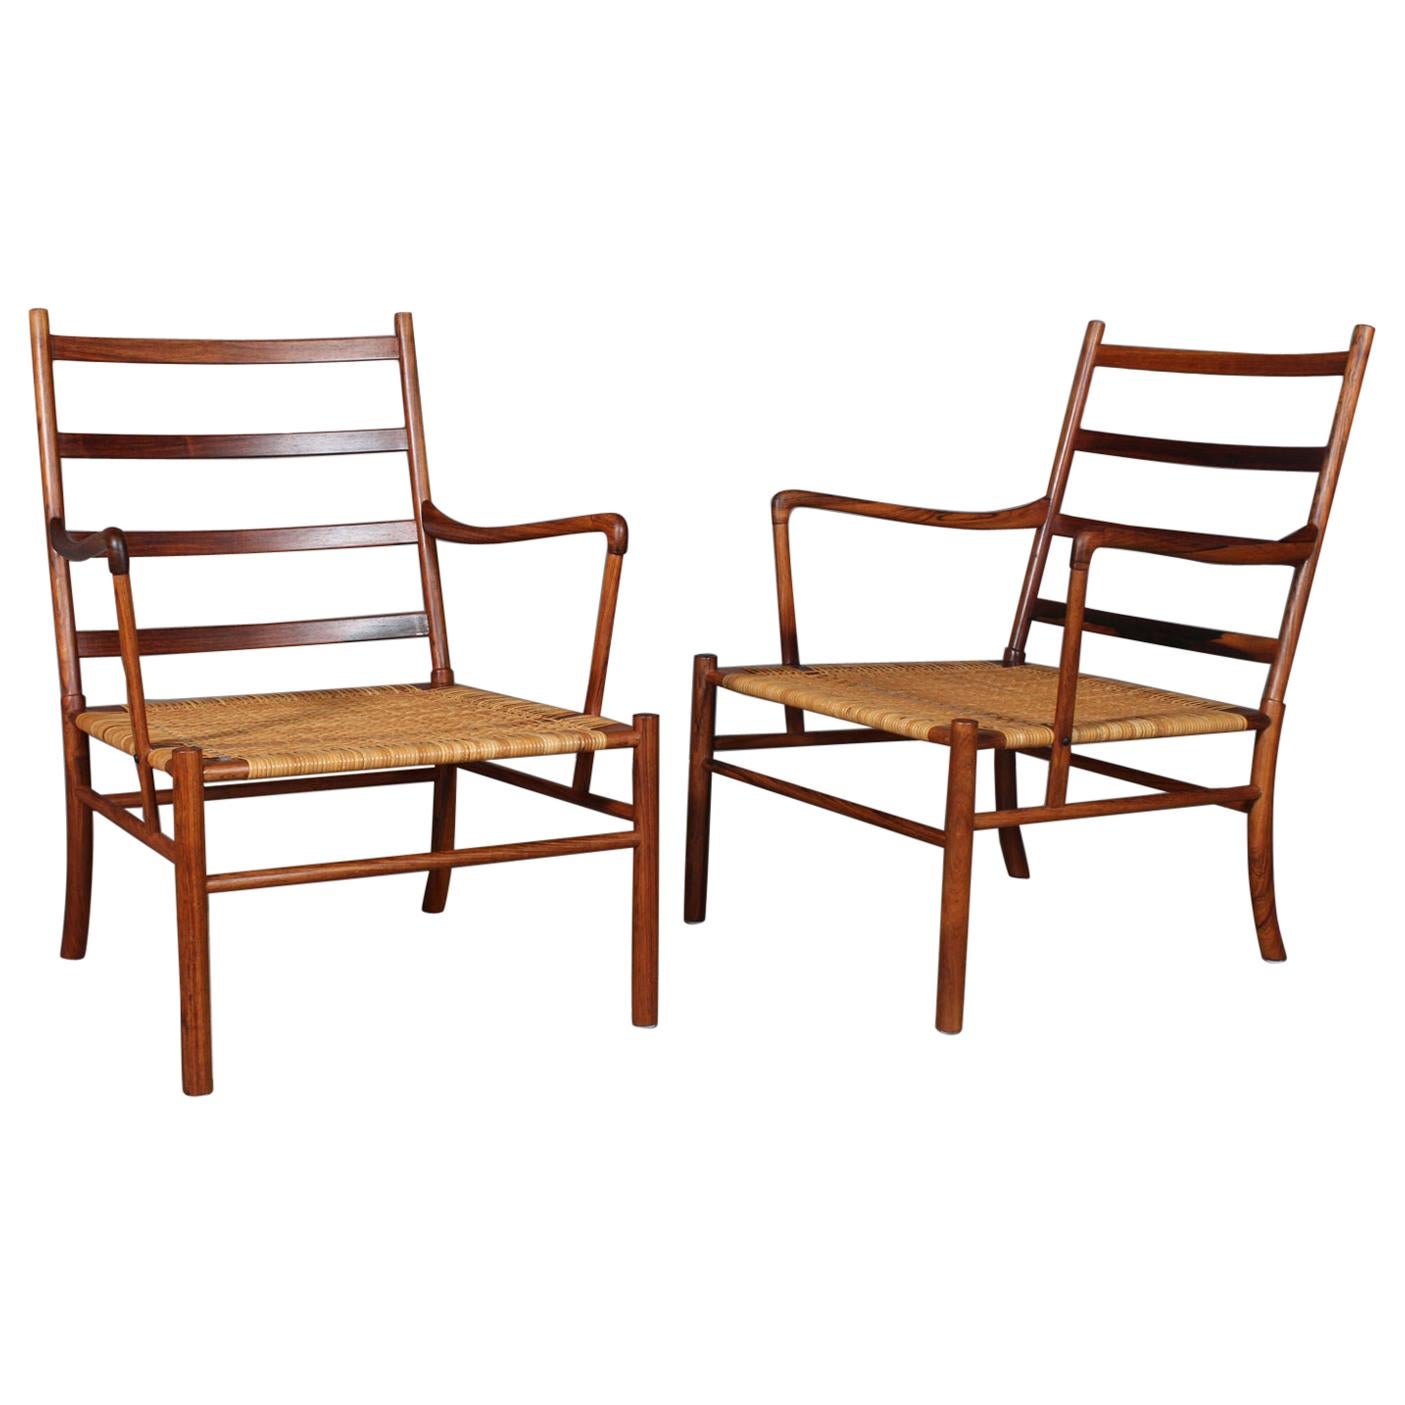 Ole Wanscher Rosewood 1st Edition set of Colonial Chairs, 1949